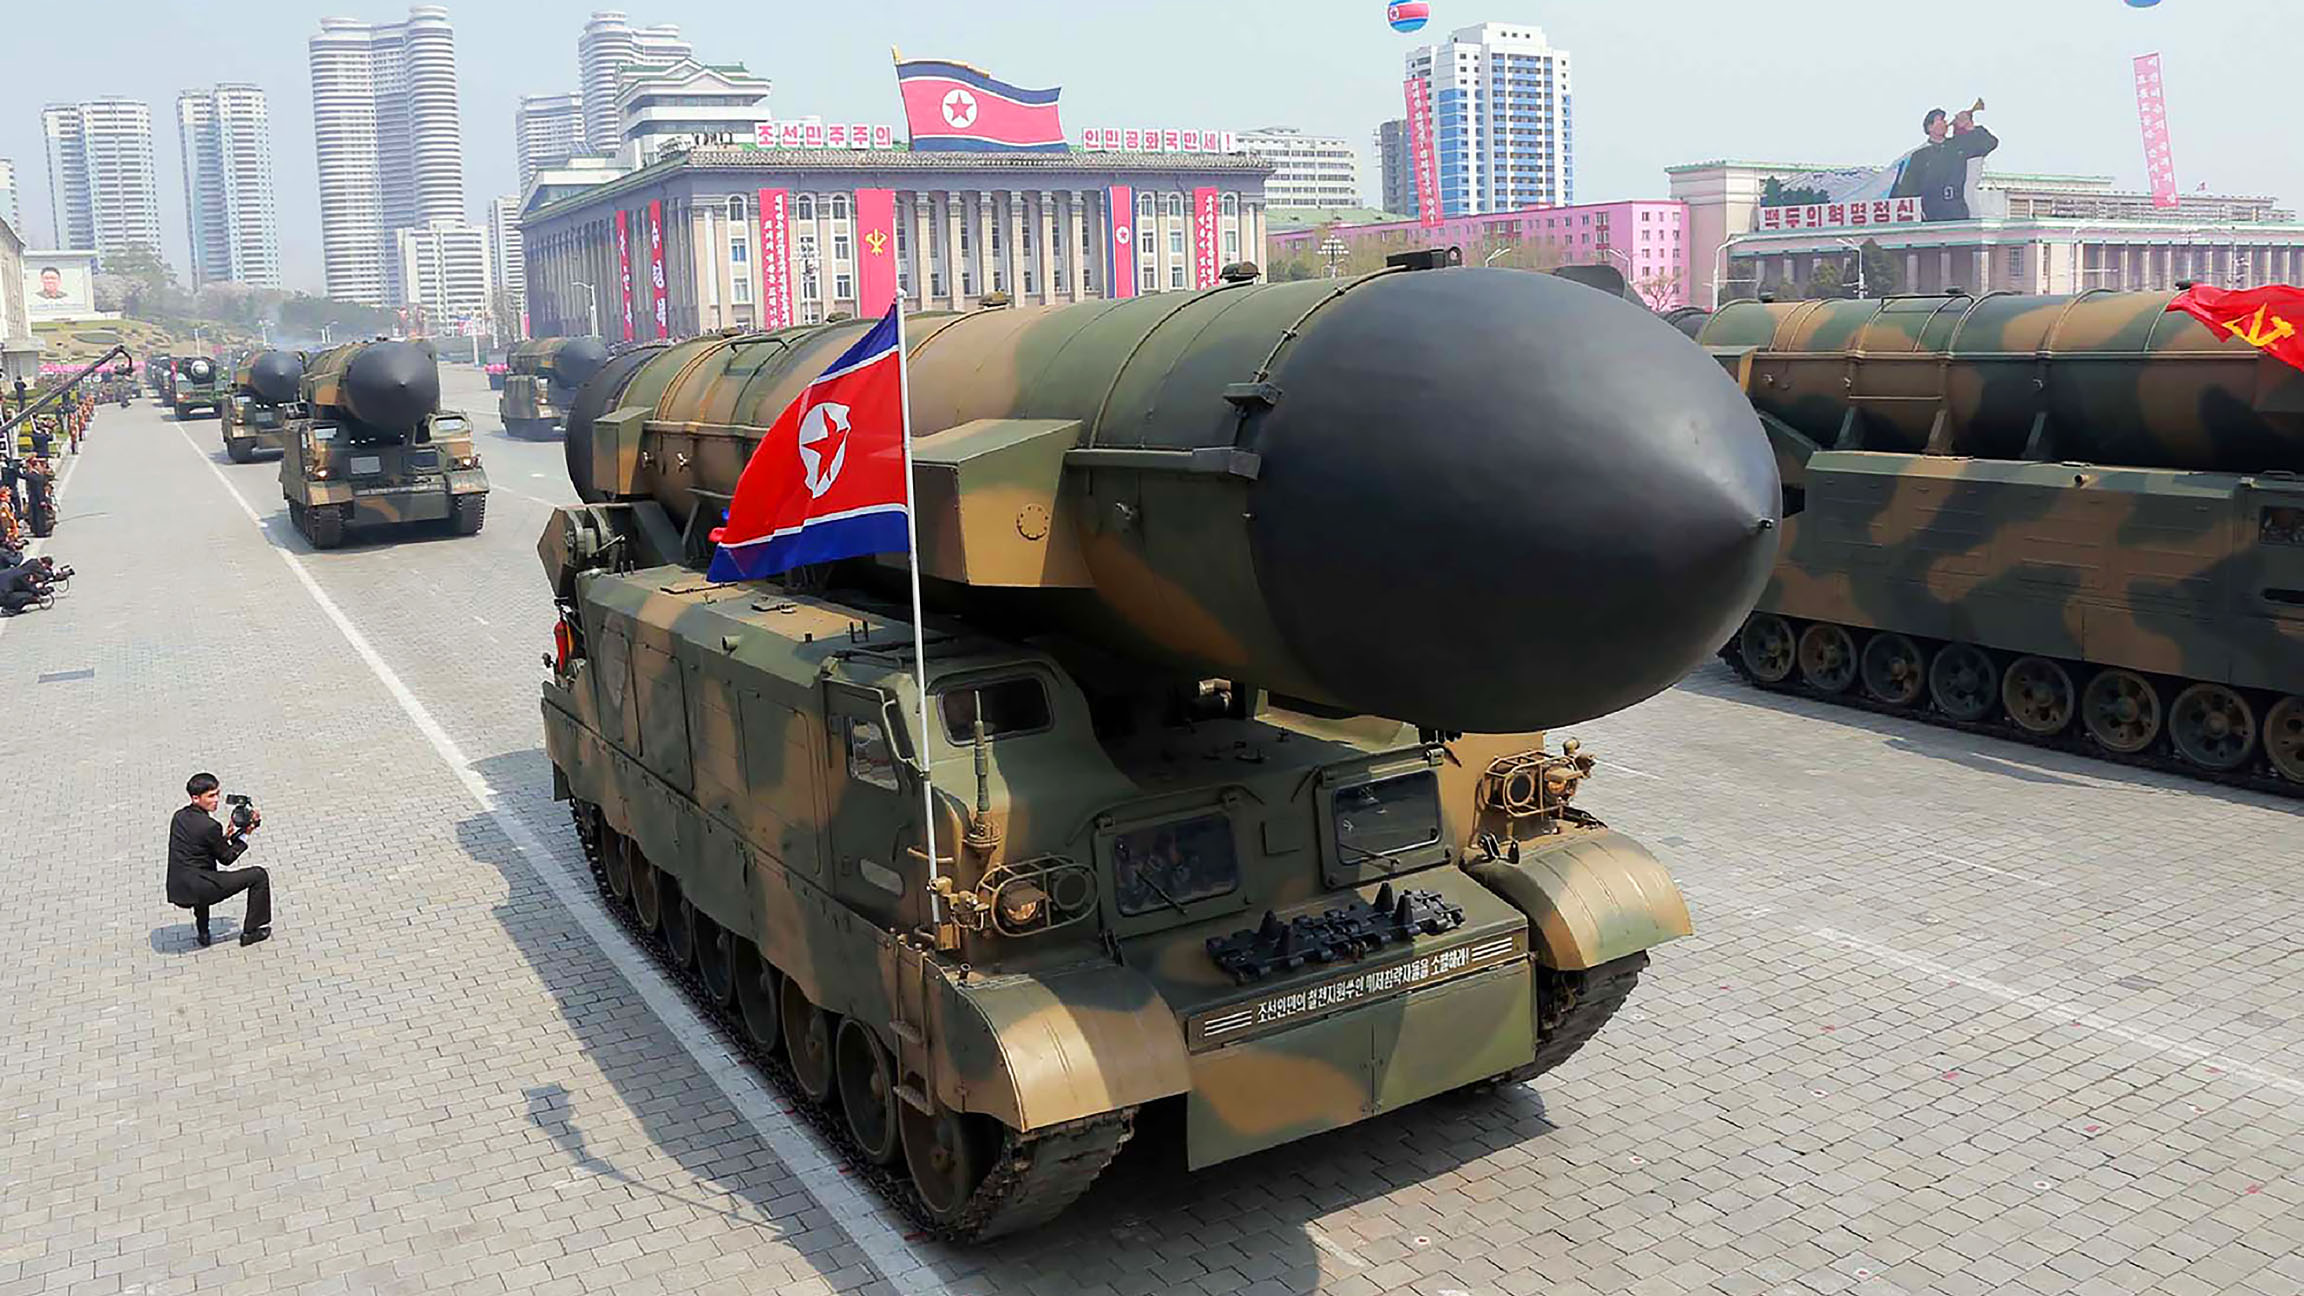 This April 15, 2017 picture released from North Korea's official Korean Central News Agency (KCNA) on April 16, 2017 shows Korean People's ballistic missiles being displayed through Kim Il-Sung square during a military parade in Pyongyang marking the 105th anniversary of the birth of late North Korean leader Kim Il-Sung. (AFP/Getty Images)